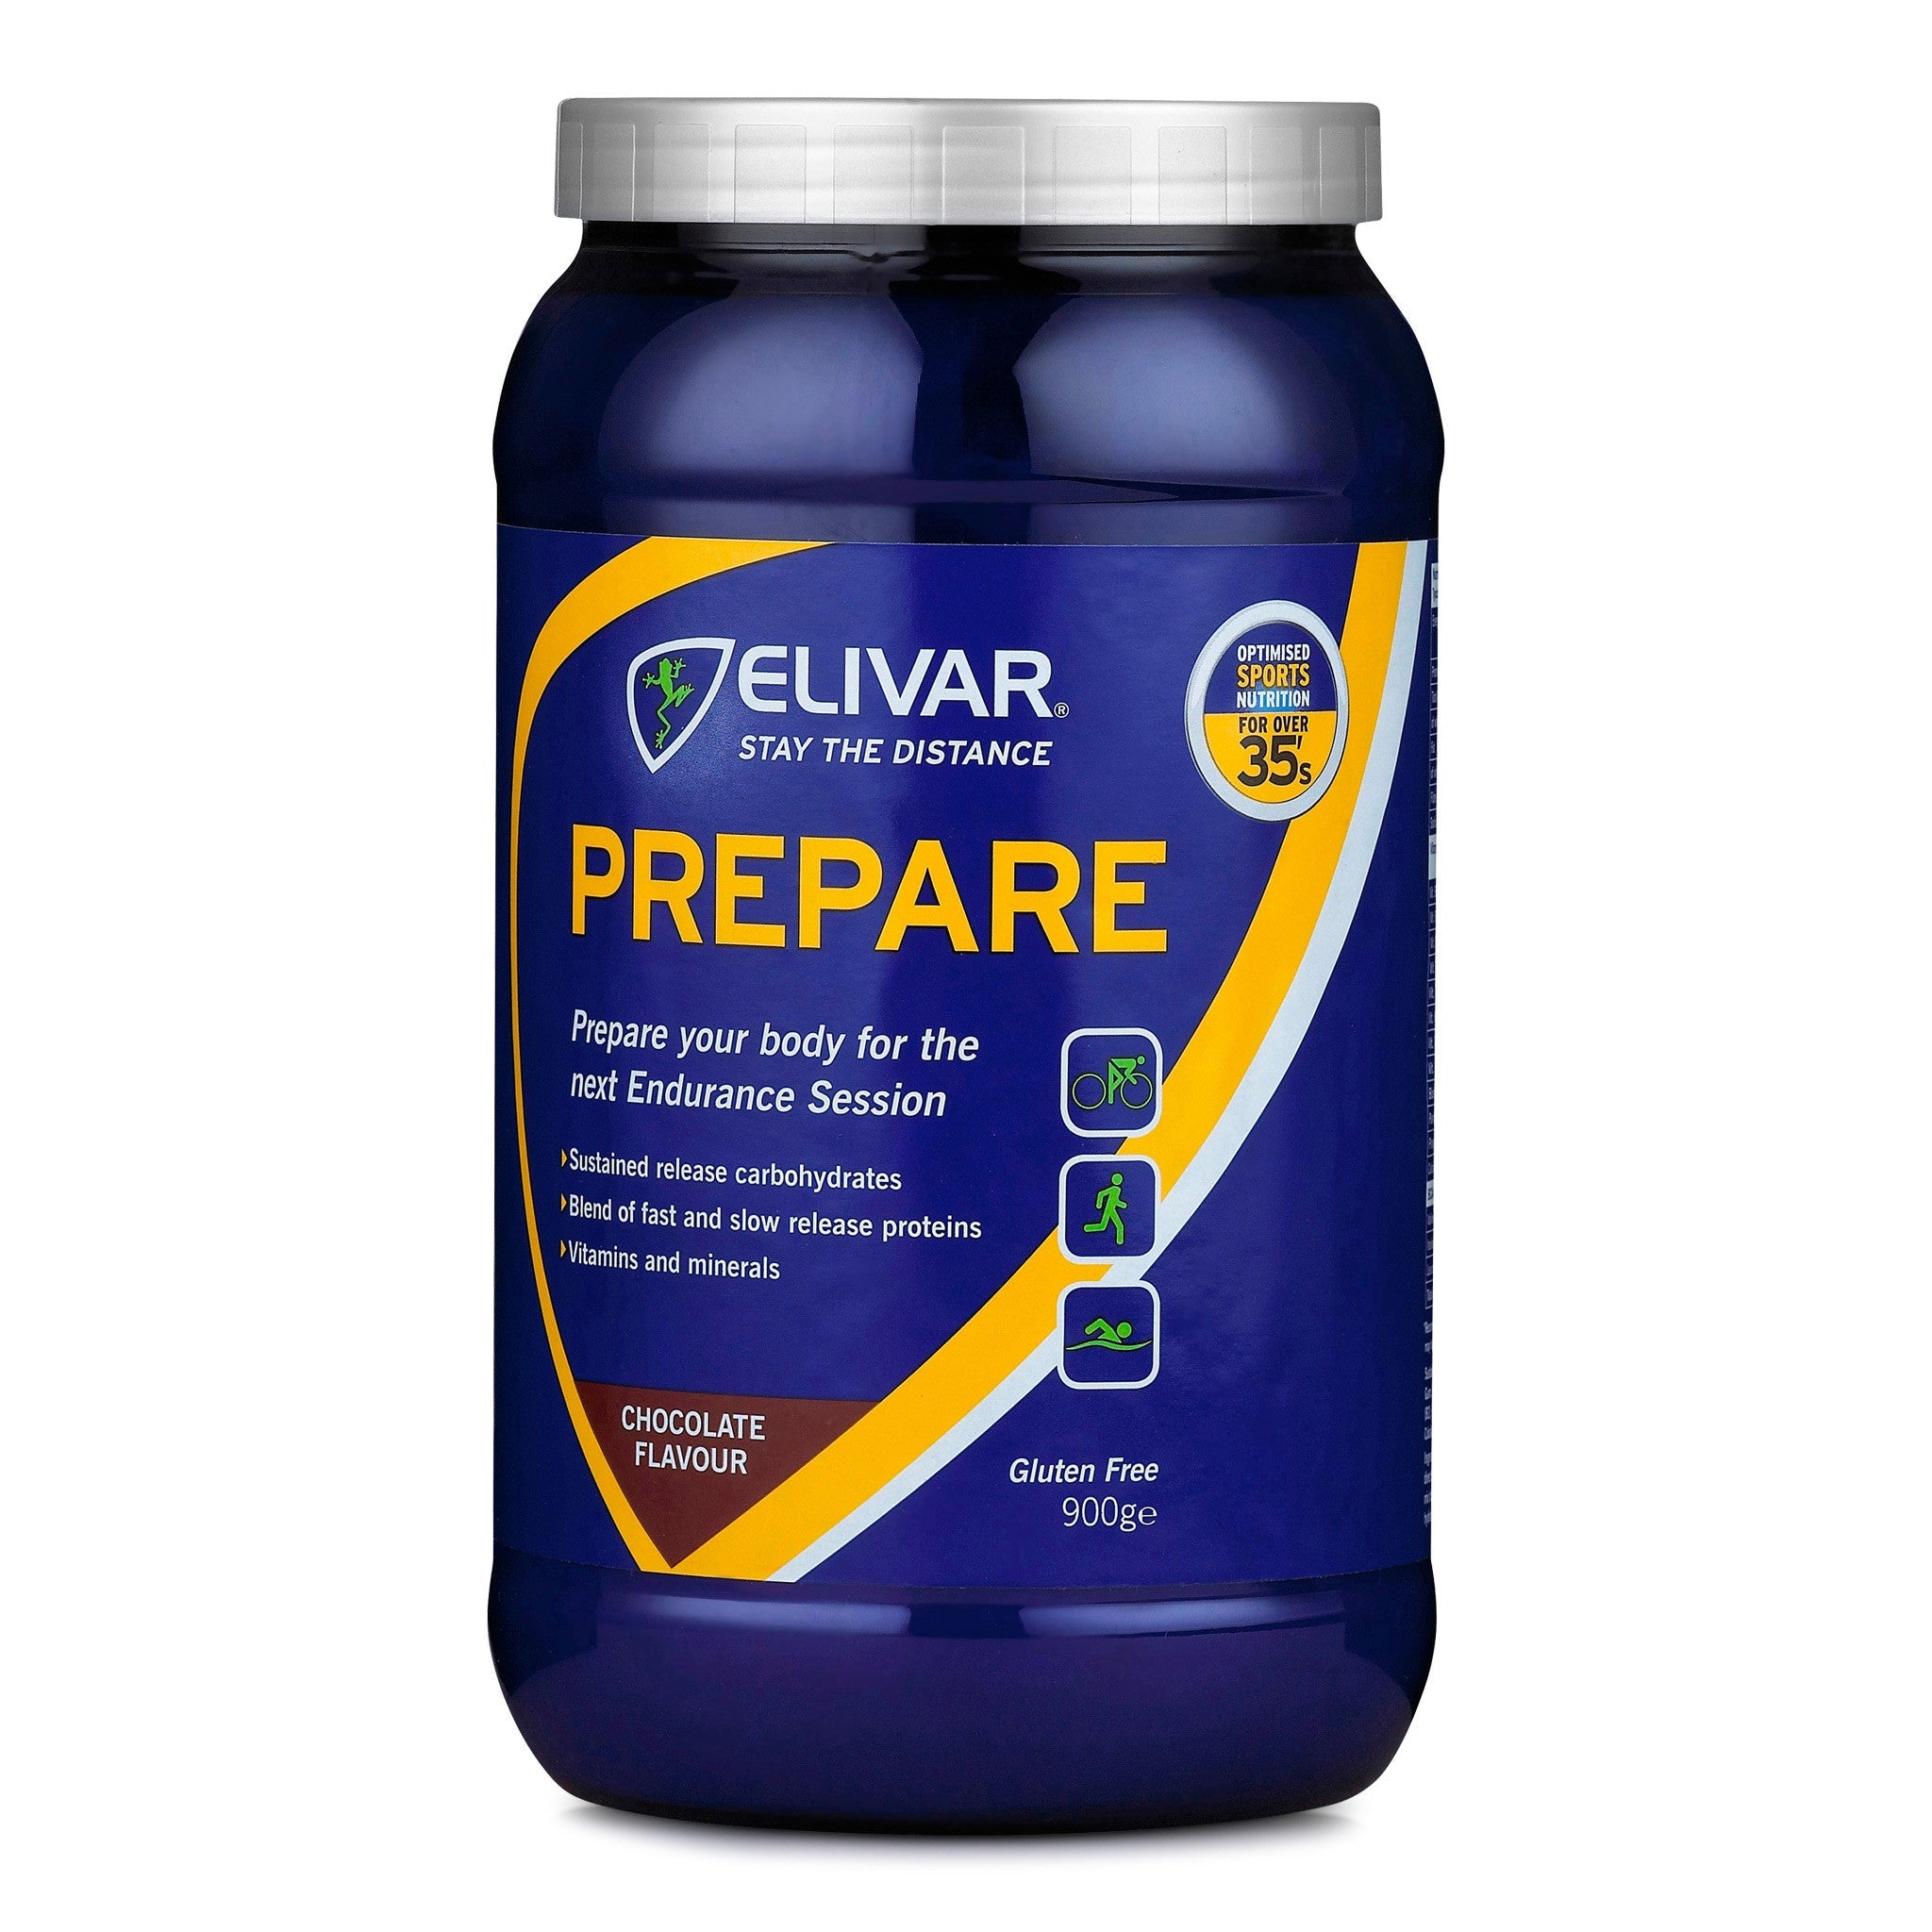 Prepare - Pre-training Energy and Protein Drink Mix - 900g Tub - Chocolate Flavour